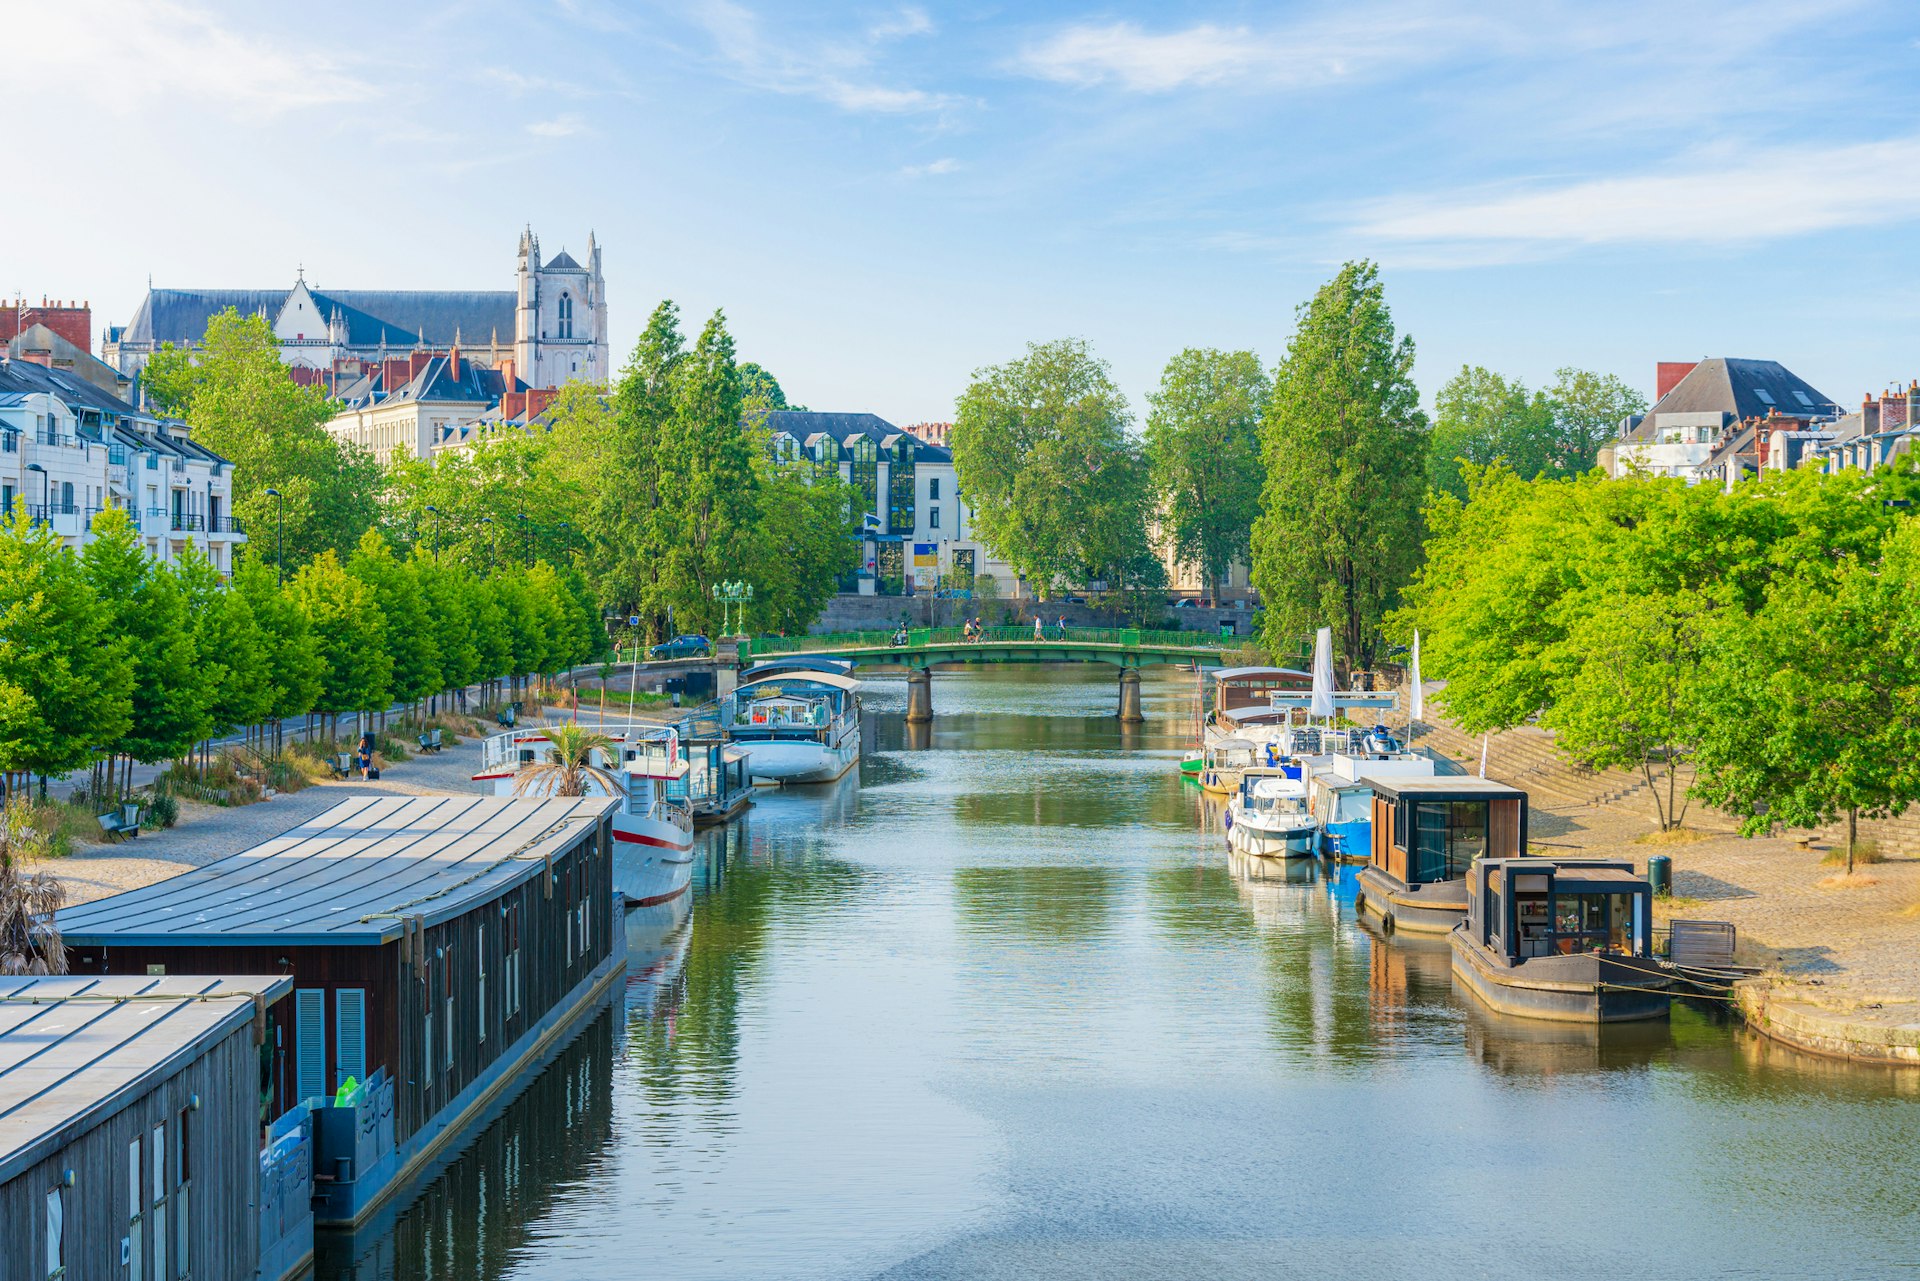 The Erdre River meets the Loire in the city of Nantes, France